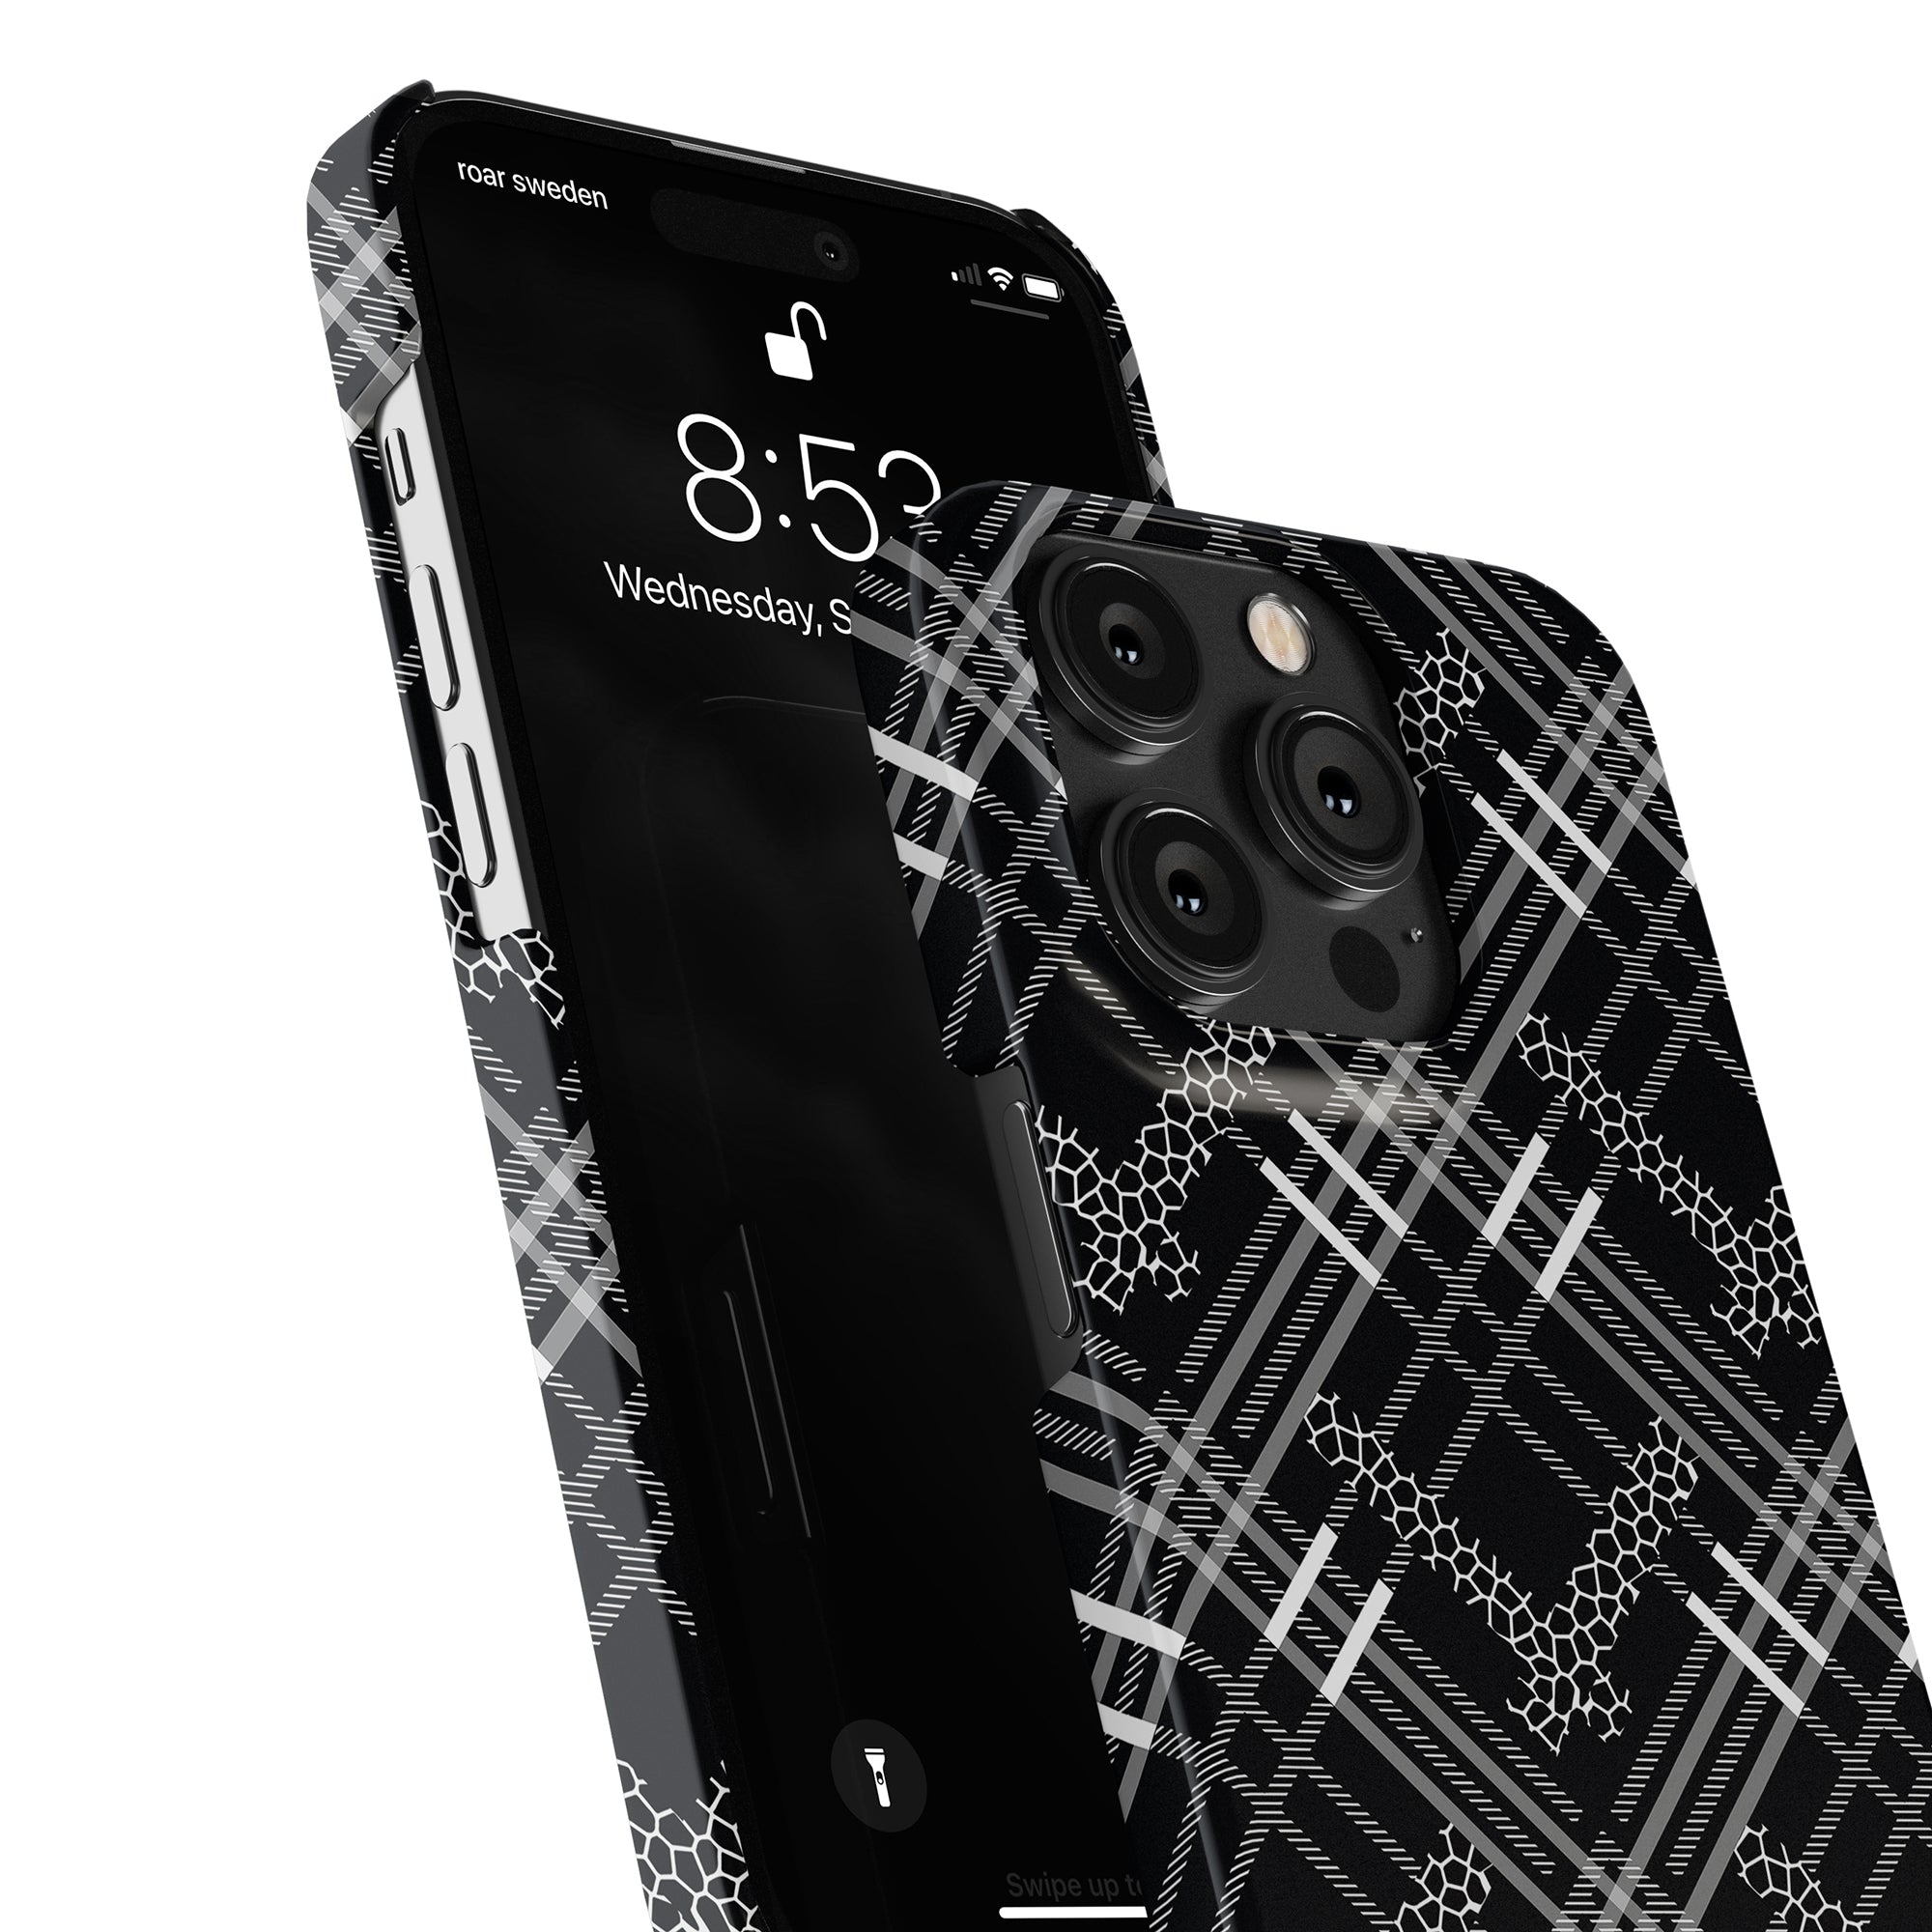 A Tartan Giraffe - Slim case for the iPhone 11 Pro, featuring a graphic pattern and made with durable material.